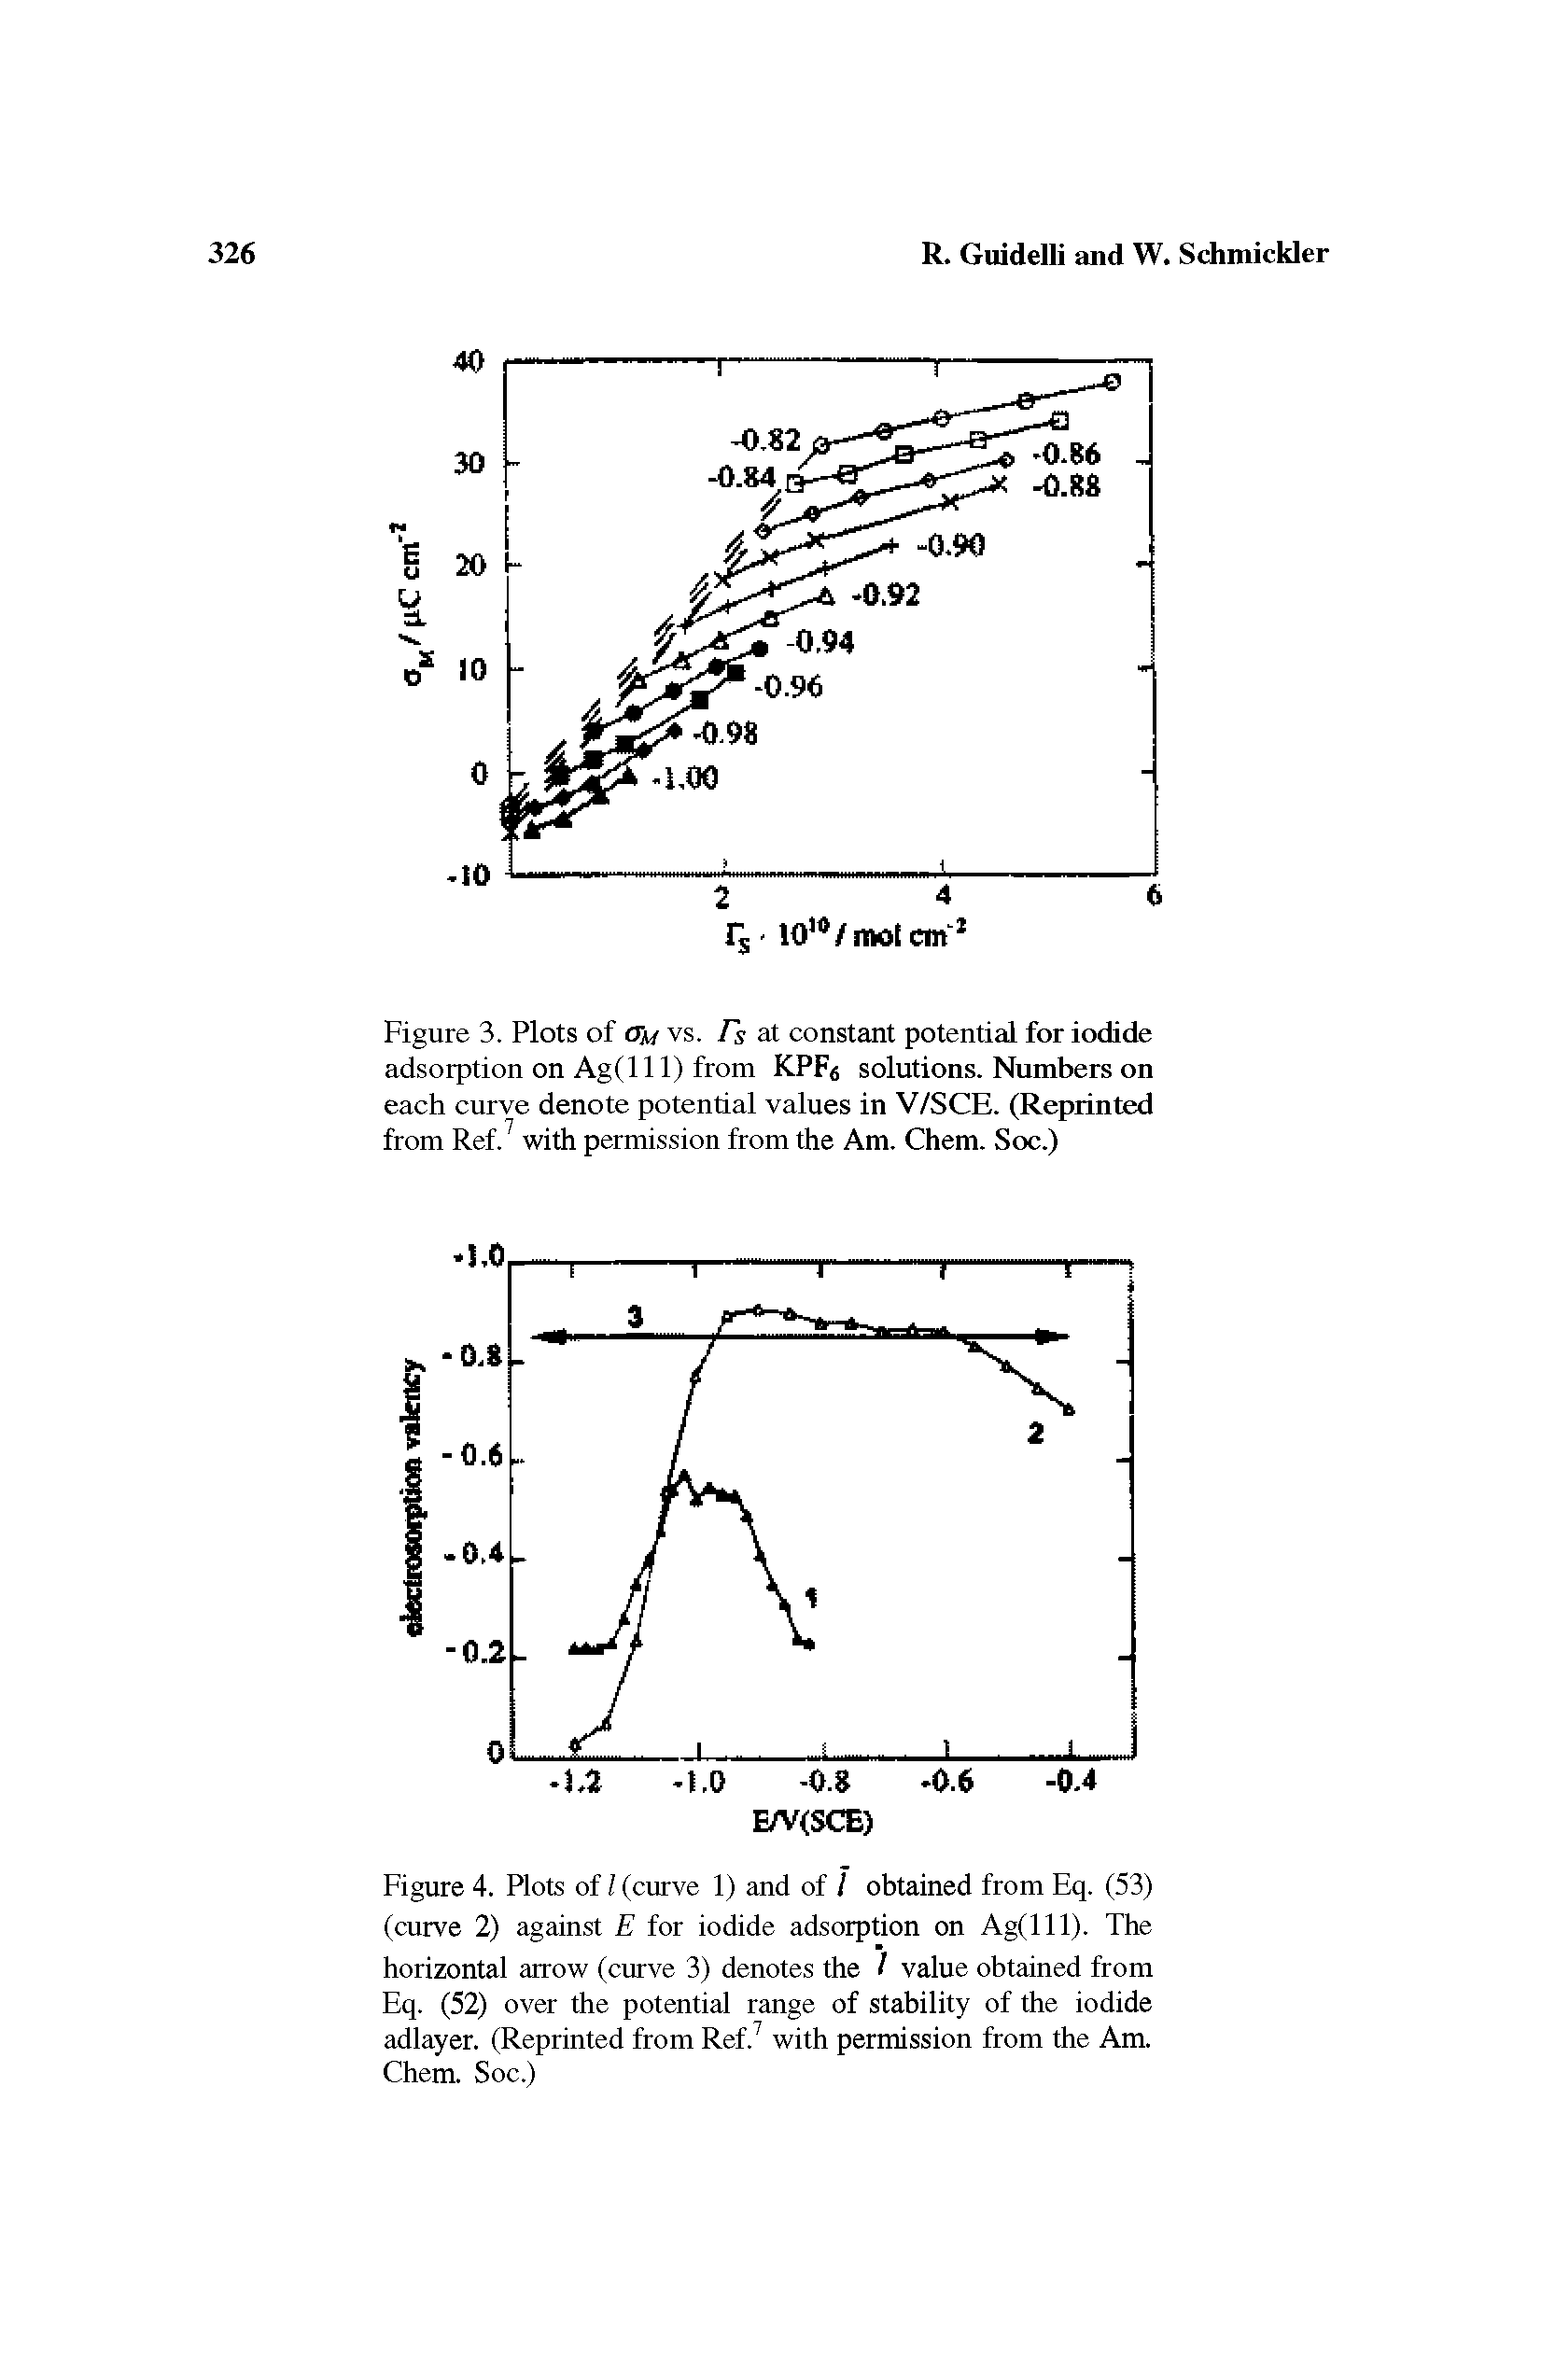 Figure 4. Plots of l (curve 1) and of l obtained from Eq. (53) (curve 2) against E for iodide adsorption on Ag(lll). The horizontal arrow (curve 3) denotes the I value obtained from Eq. (52) over the potential range of stability of the iodide adlayer. (Reprinted from Ref.7 with permission from the Am. Chem. Soc.)...